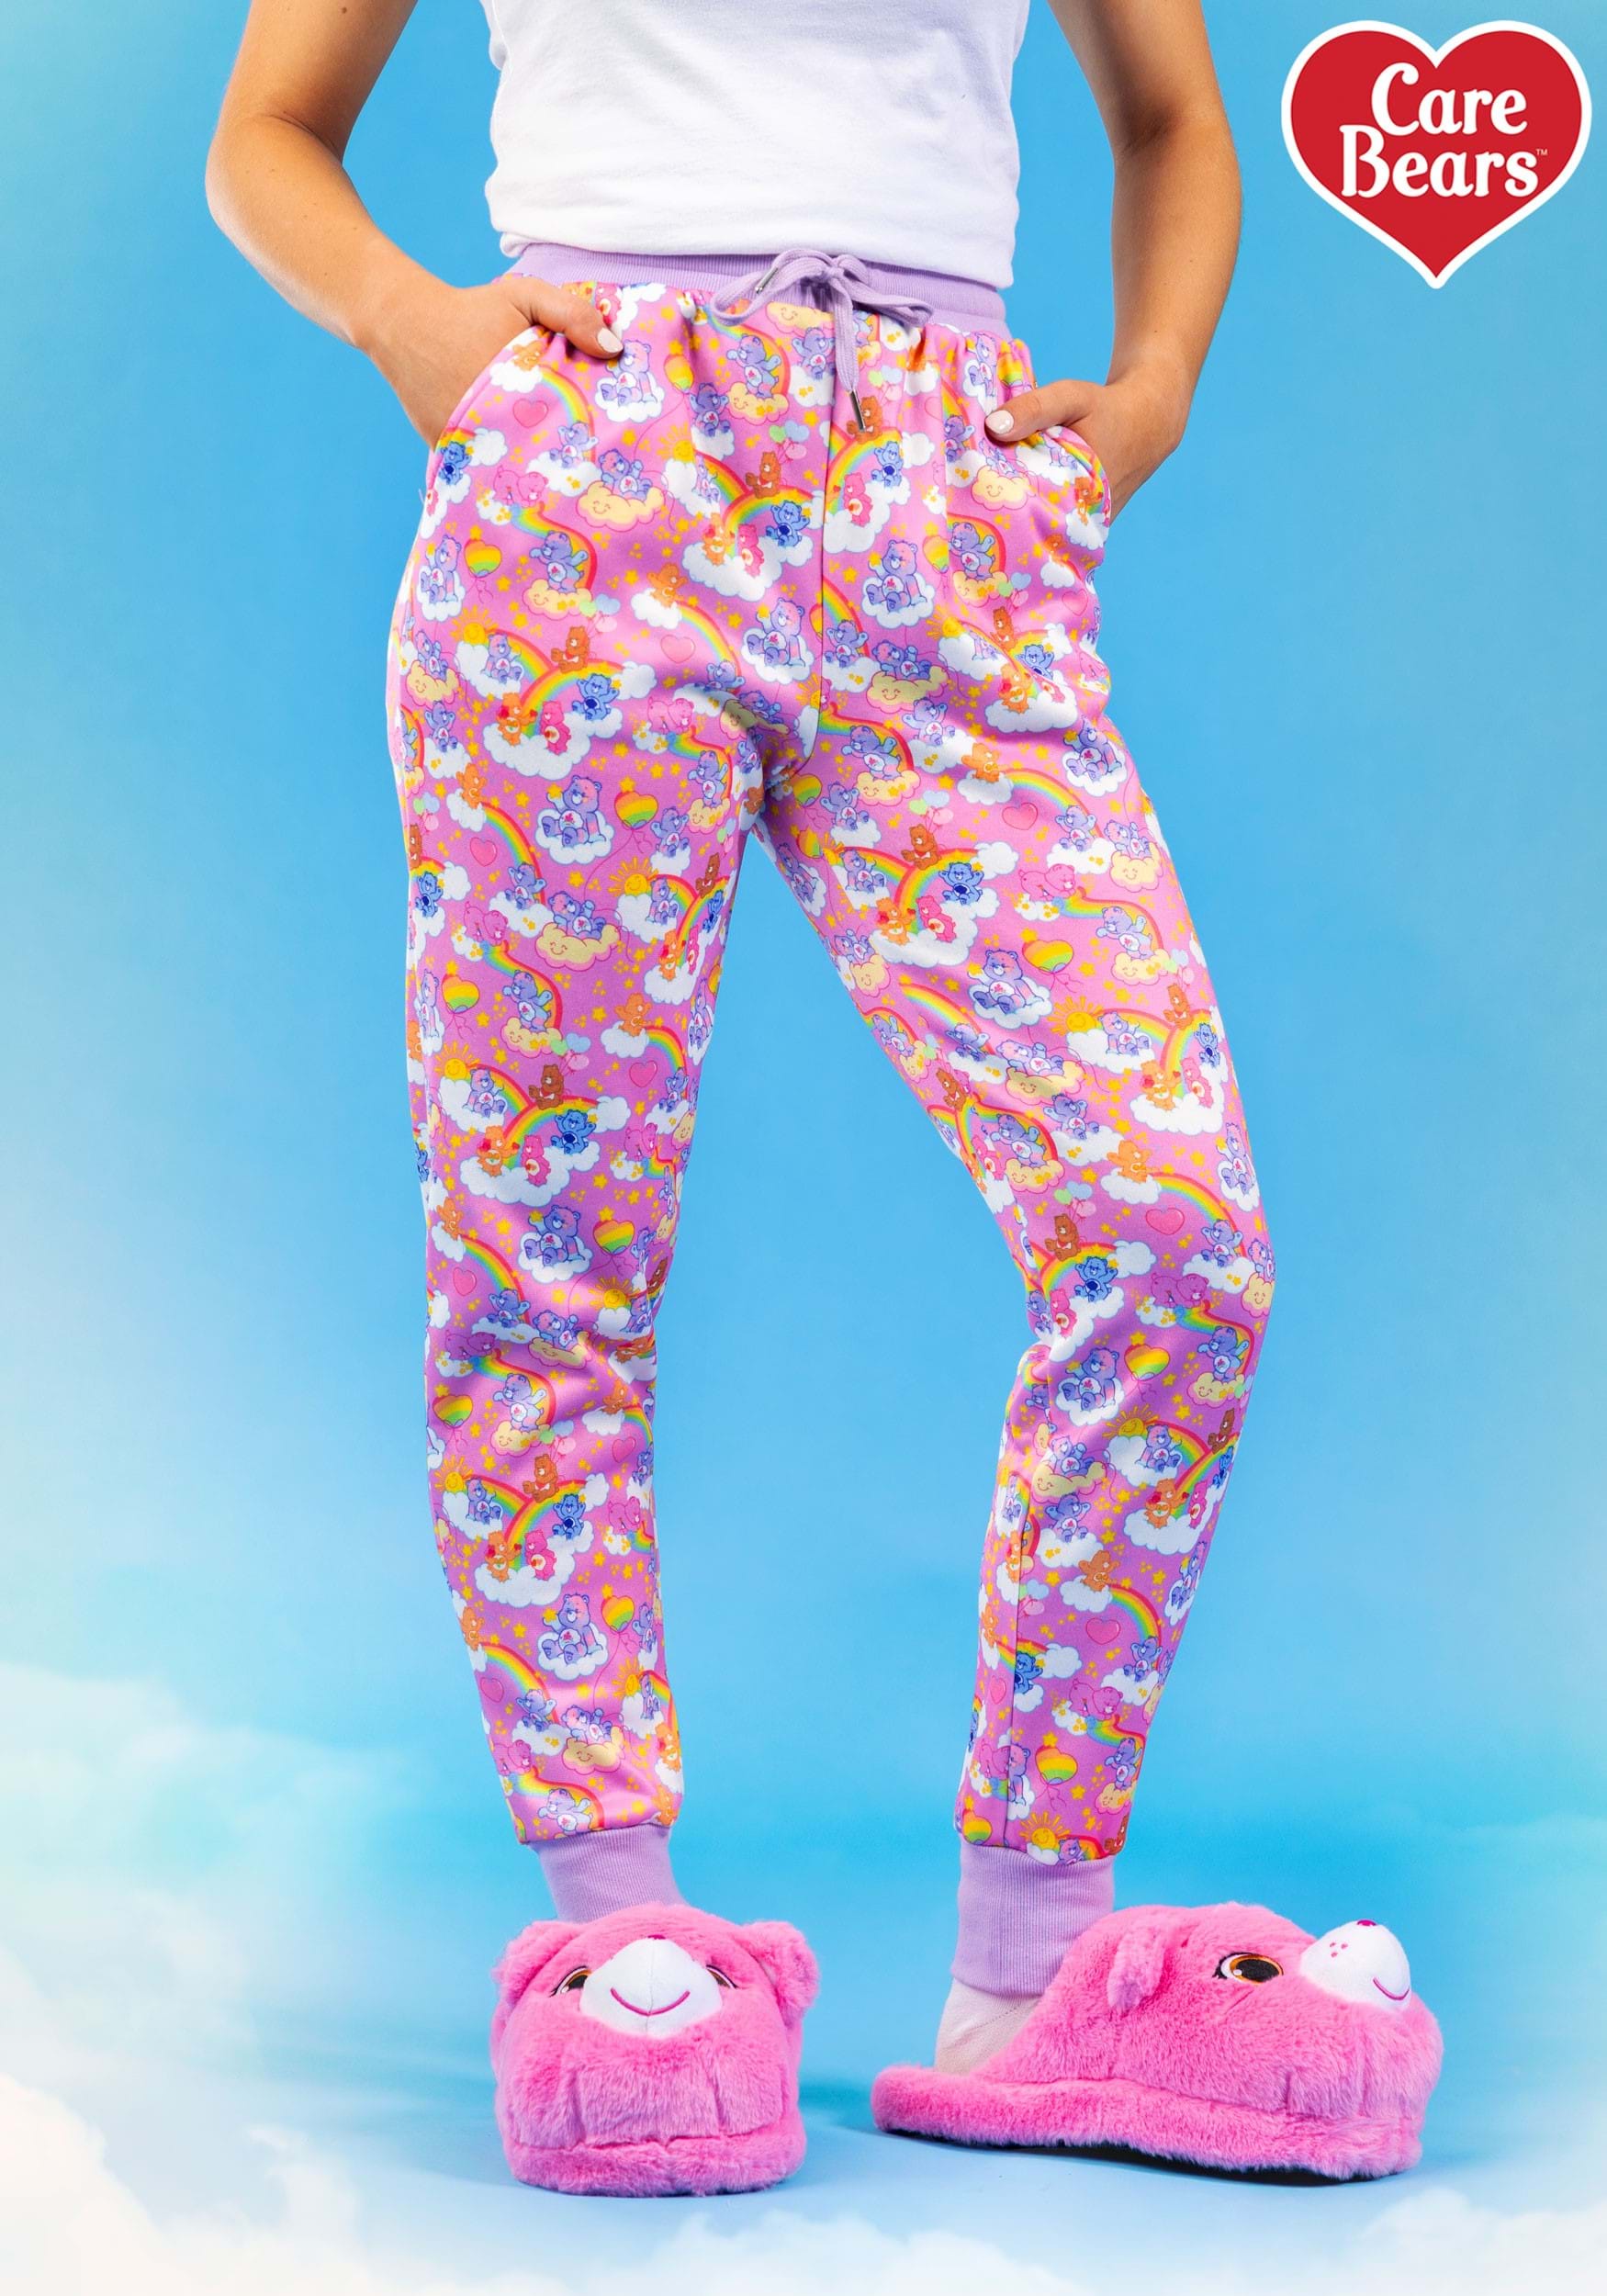 https://images.fun.com/products/76482/1-1/womens-pink-care-bears-lounge-pants.jpg